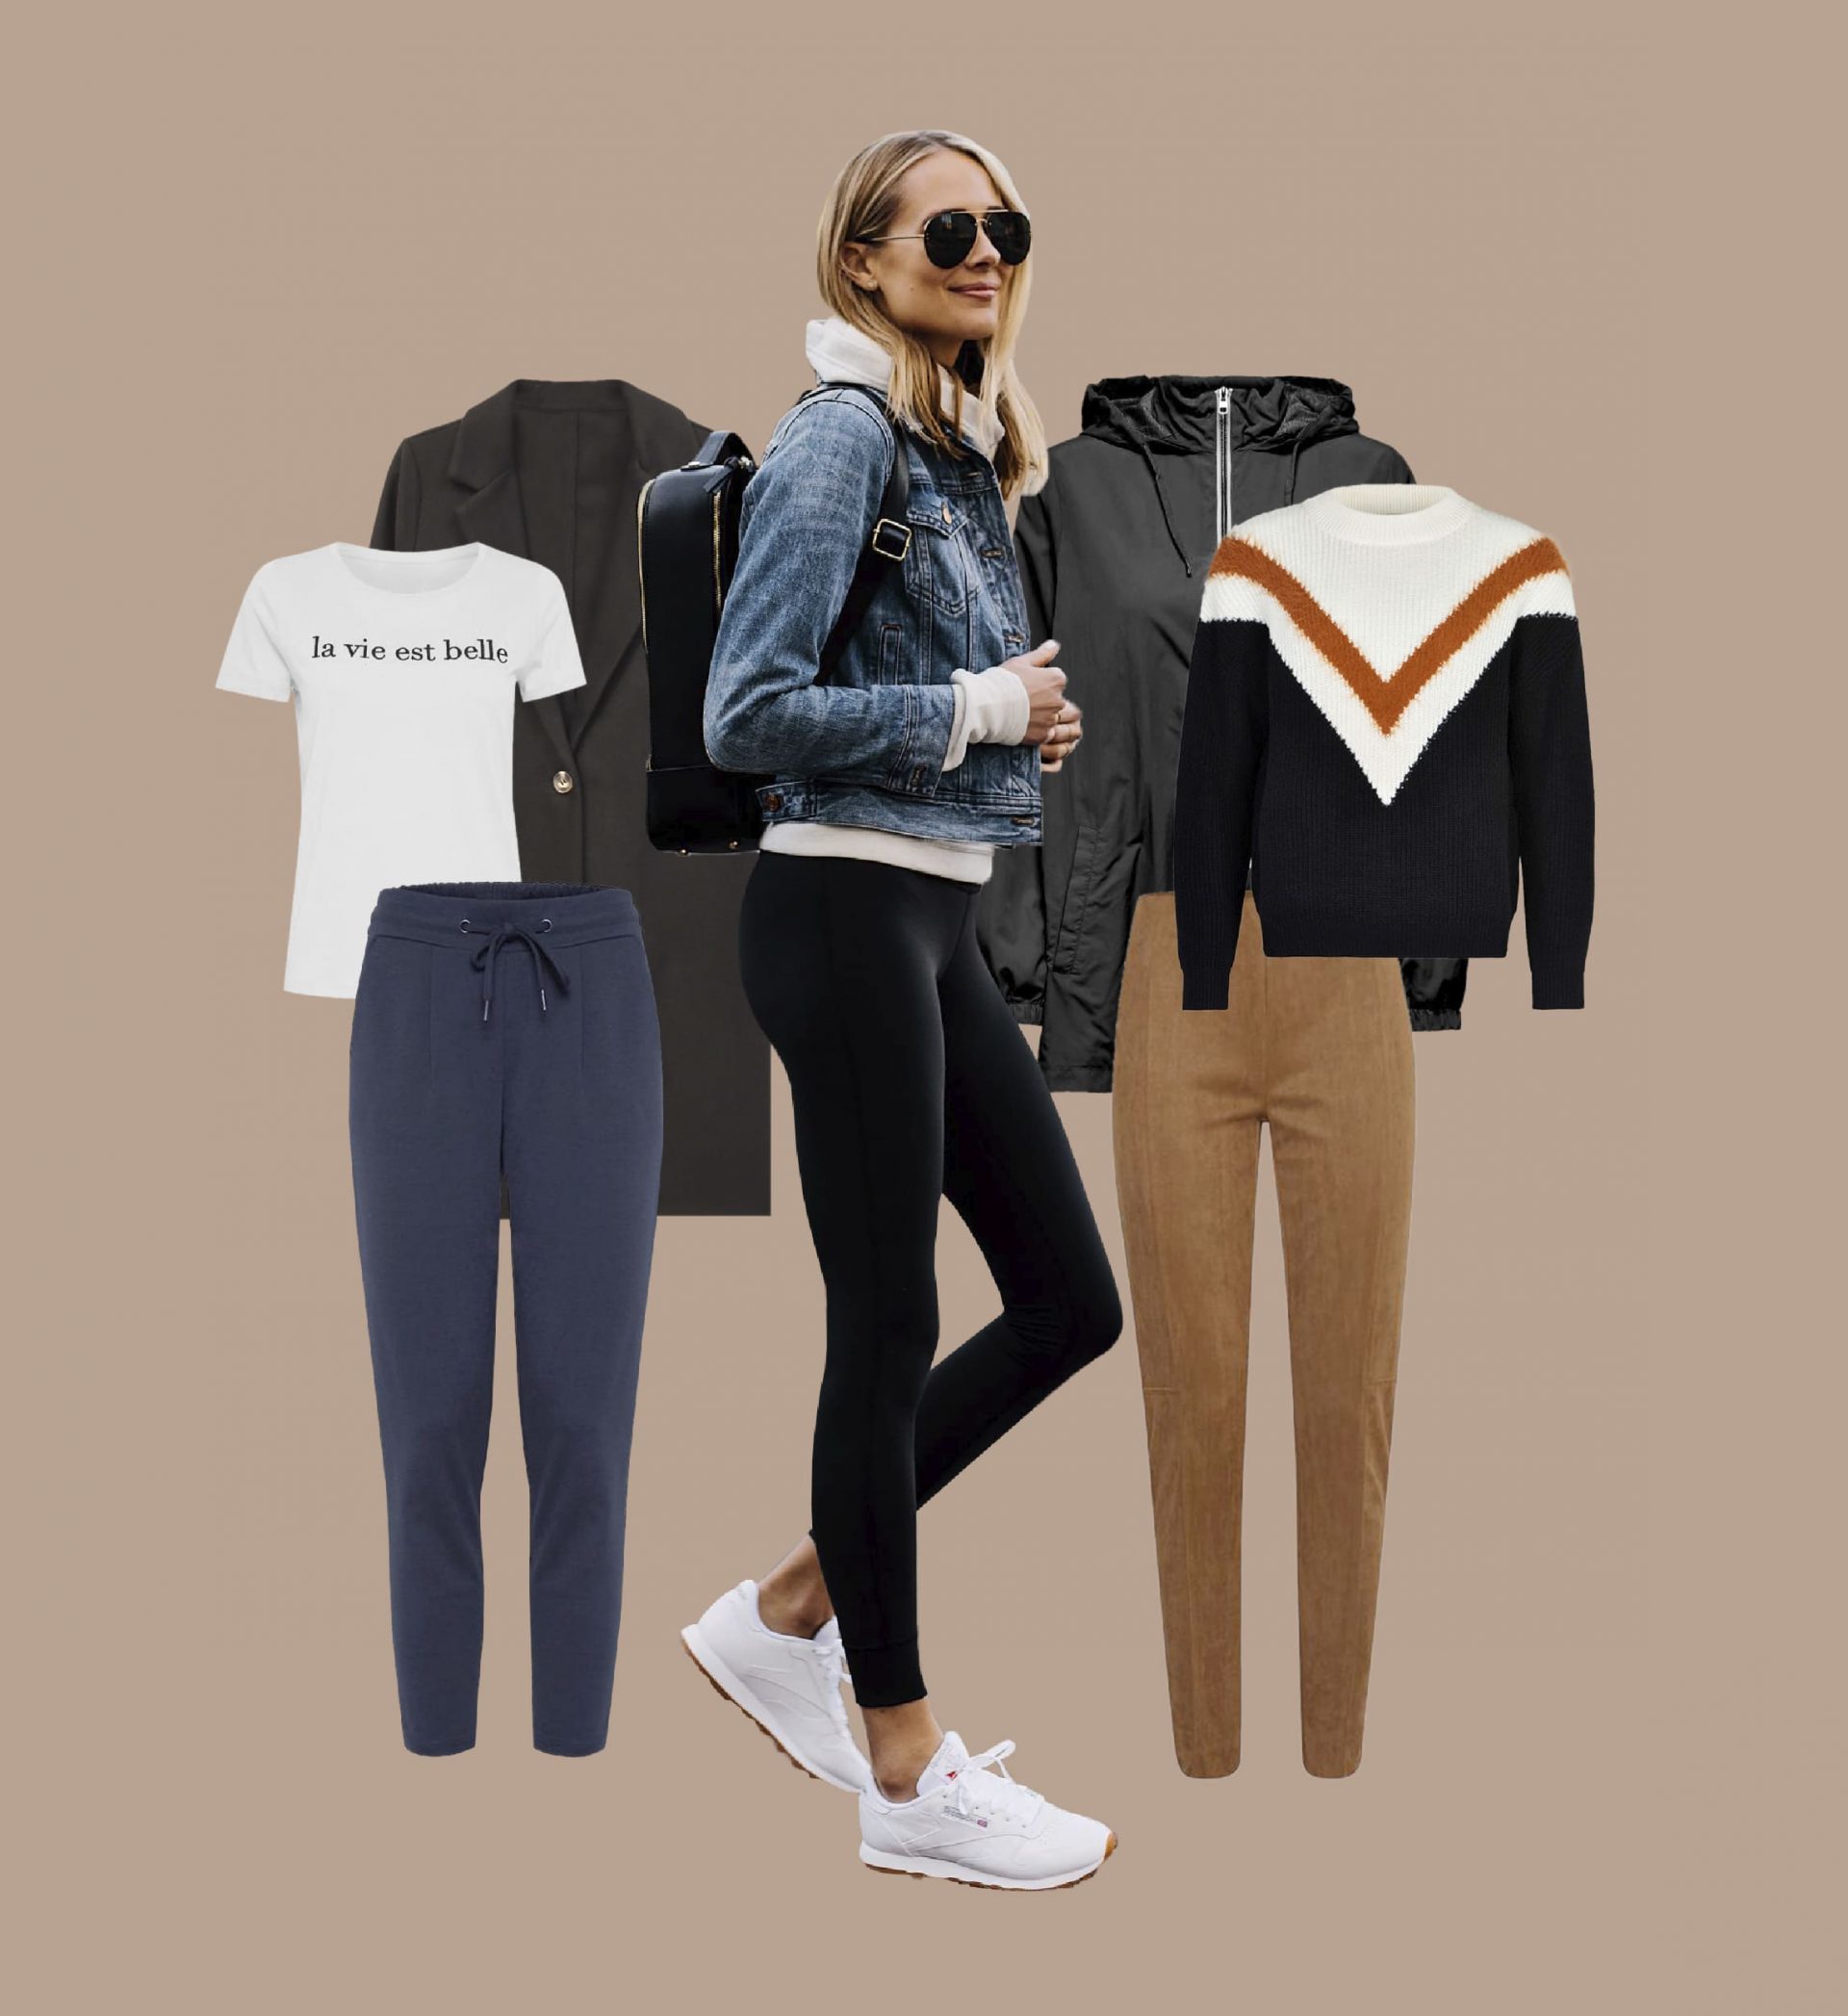 Athleisure Style Guide 2020